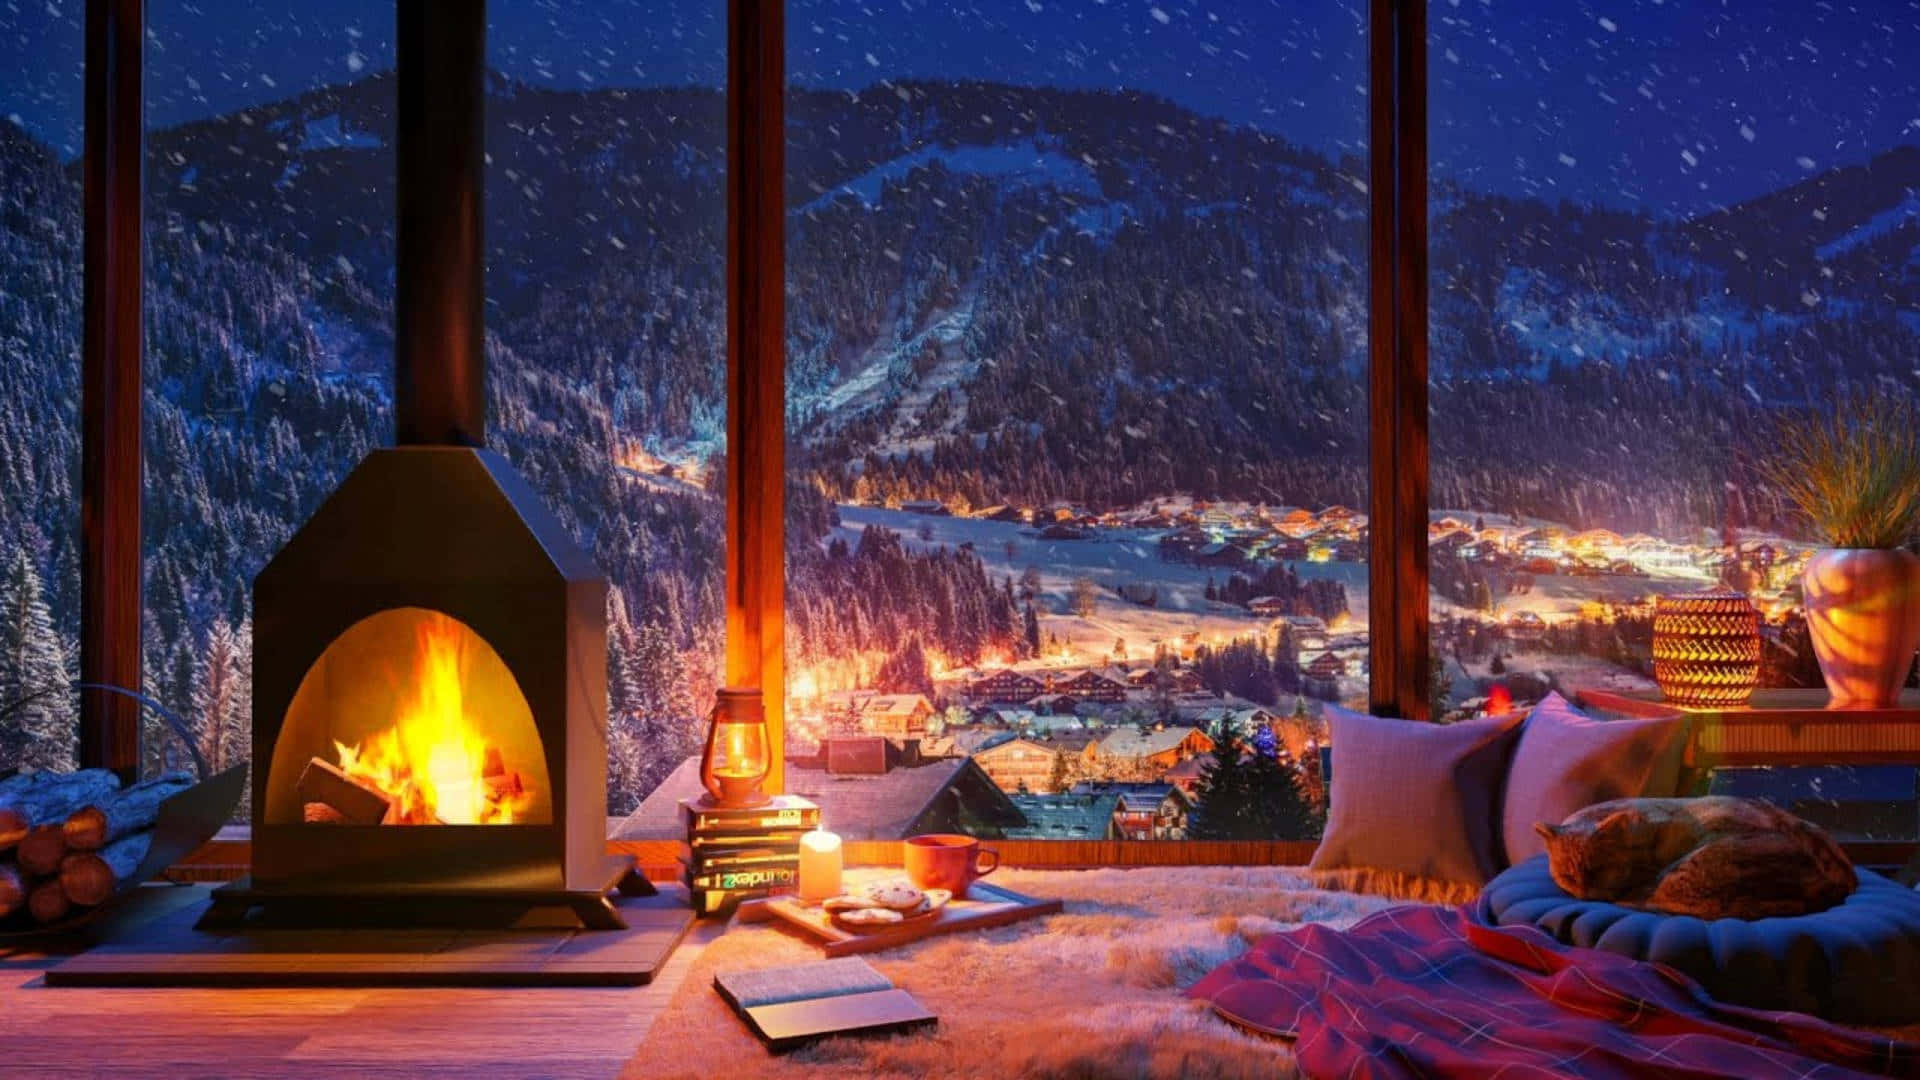 Cozy Winter Aesthetic Fireplace Landscape Photography Wallpaper